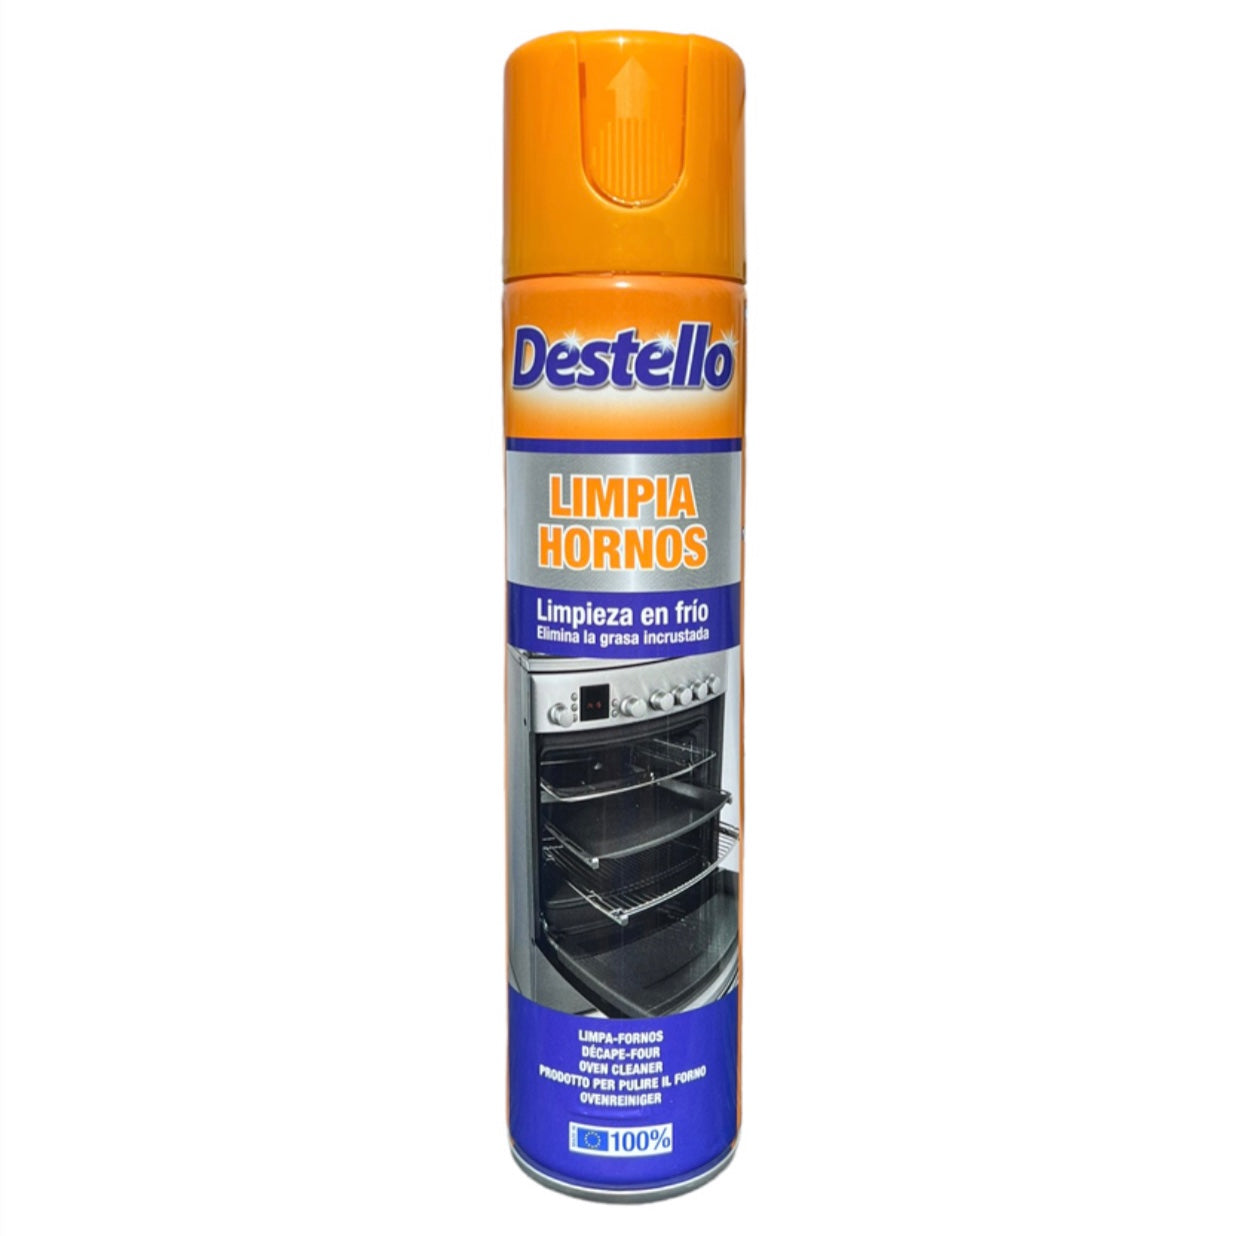 Destello Oven Cleaner Spray – The Little Spanish Cleaning Company